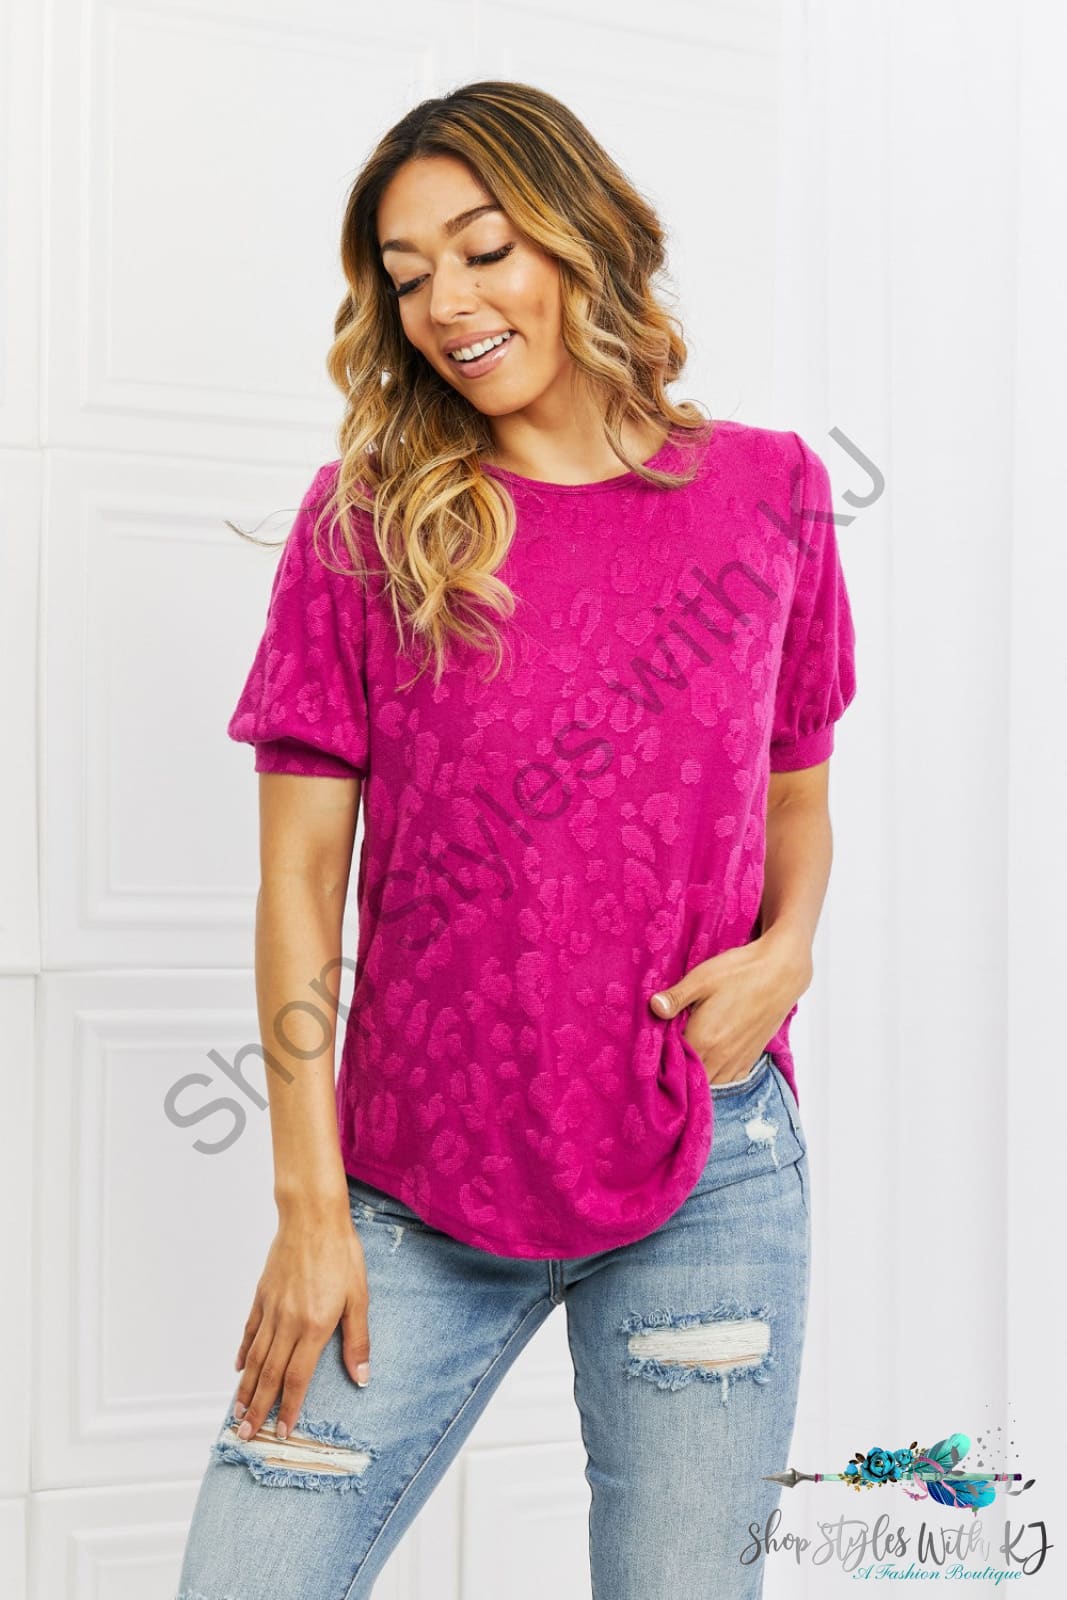 Carnival Vibes Animal Textured Top Shirts & Tops